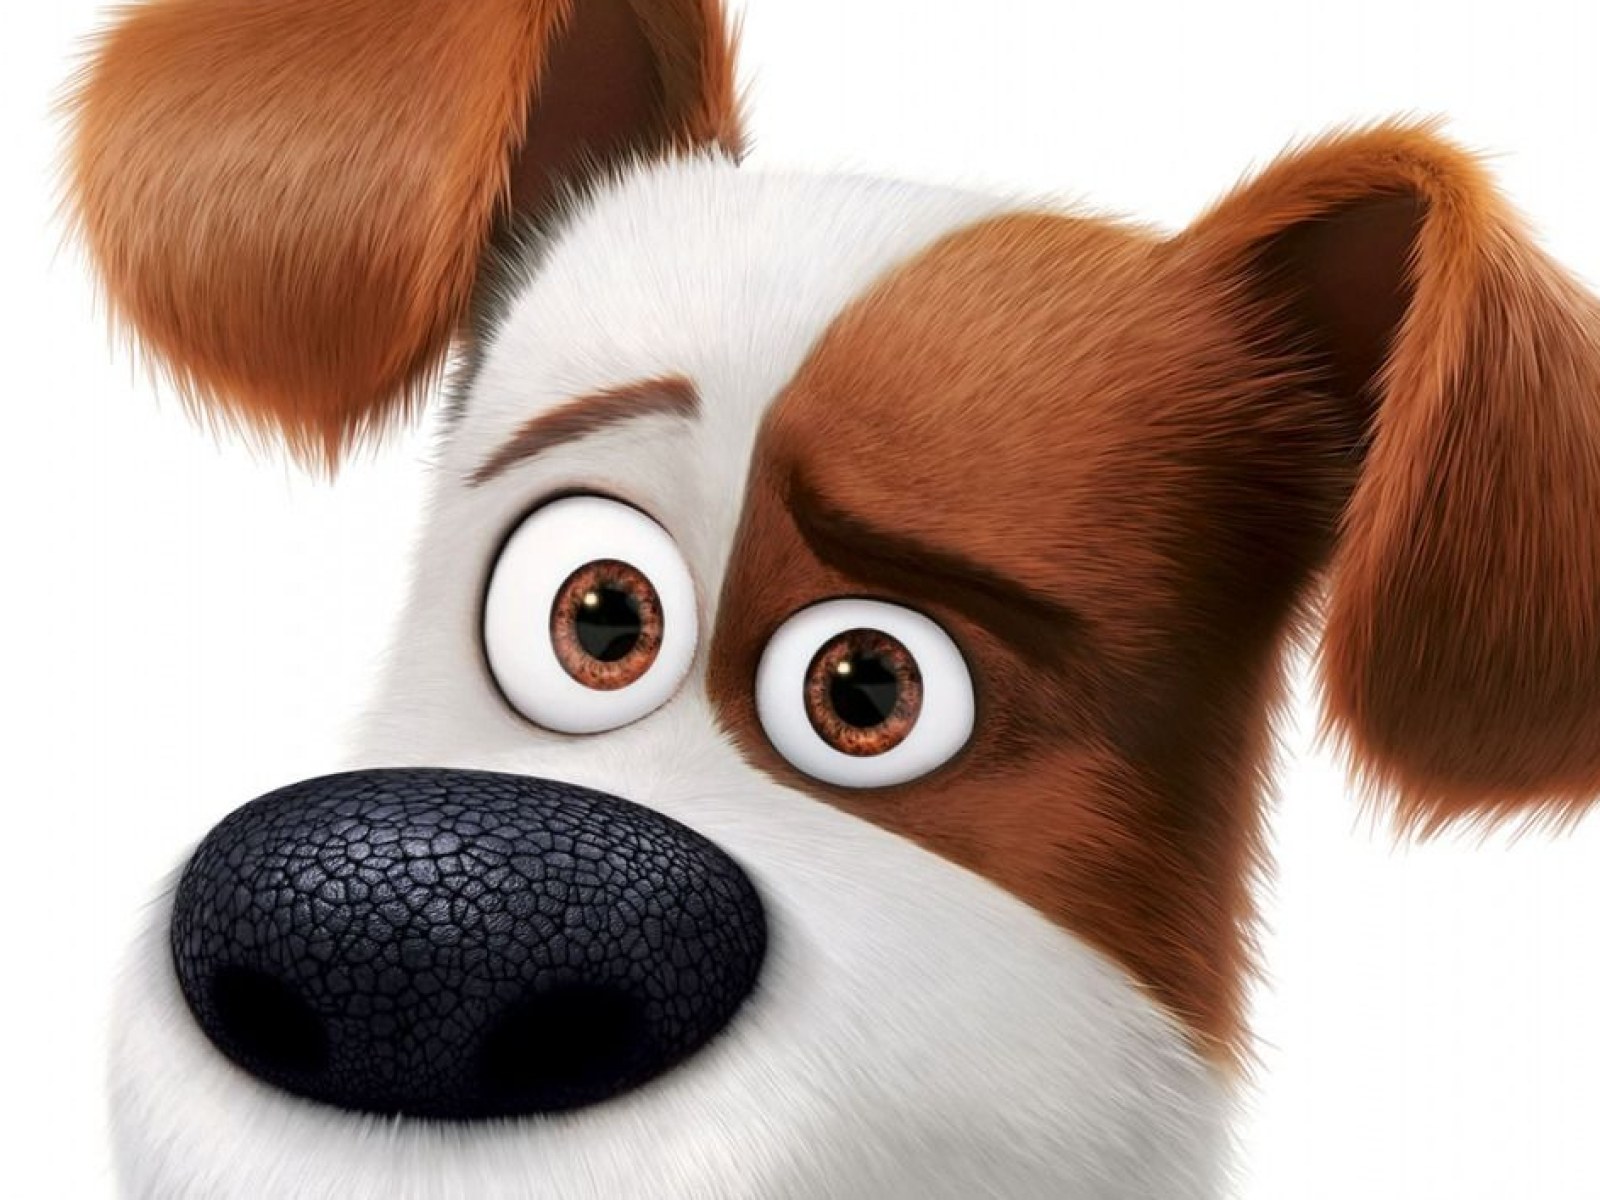 18 Most Popular Movies About Pets